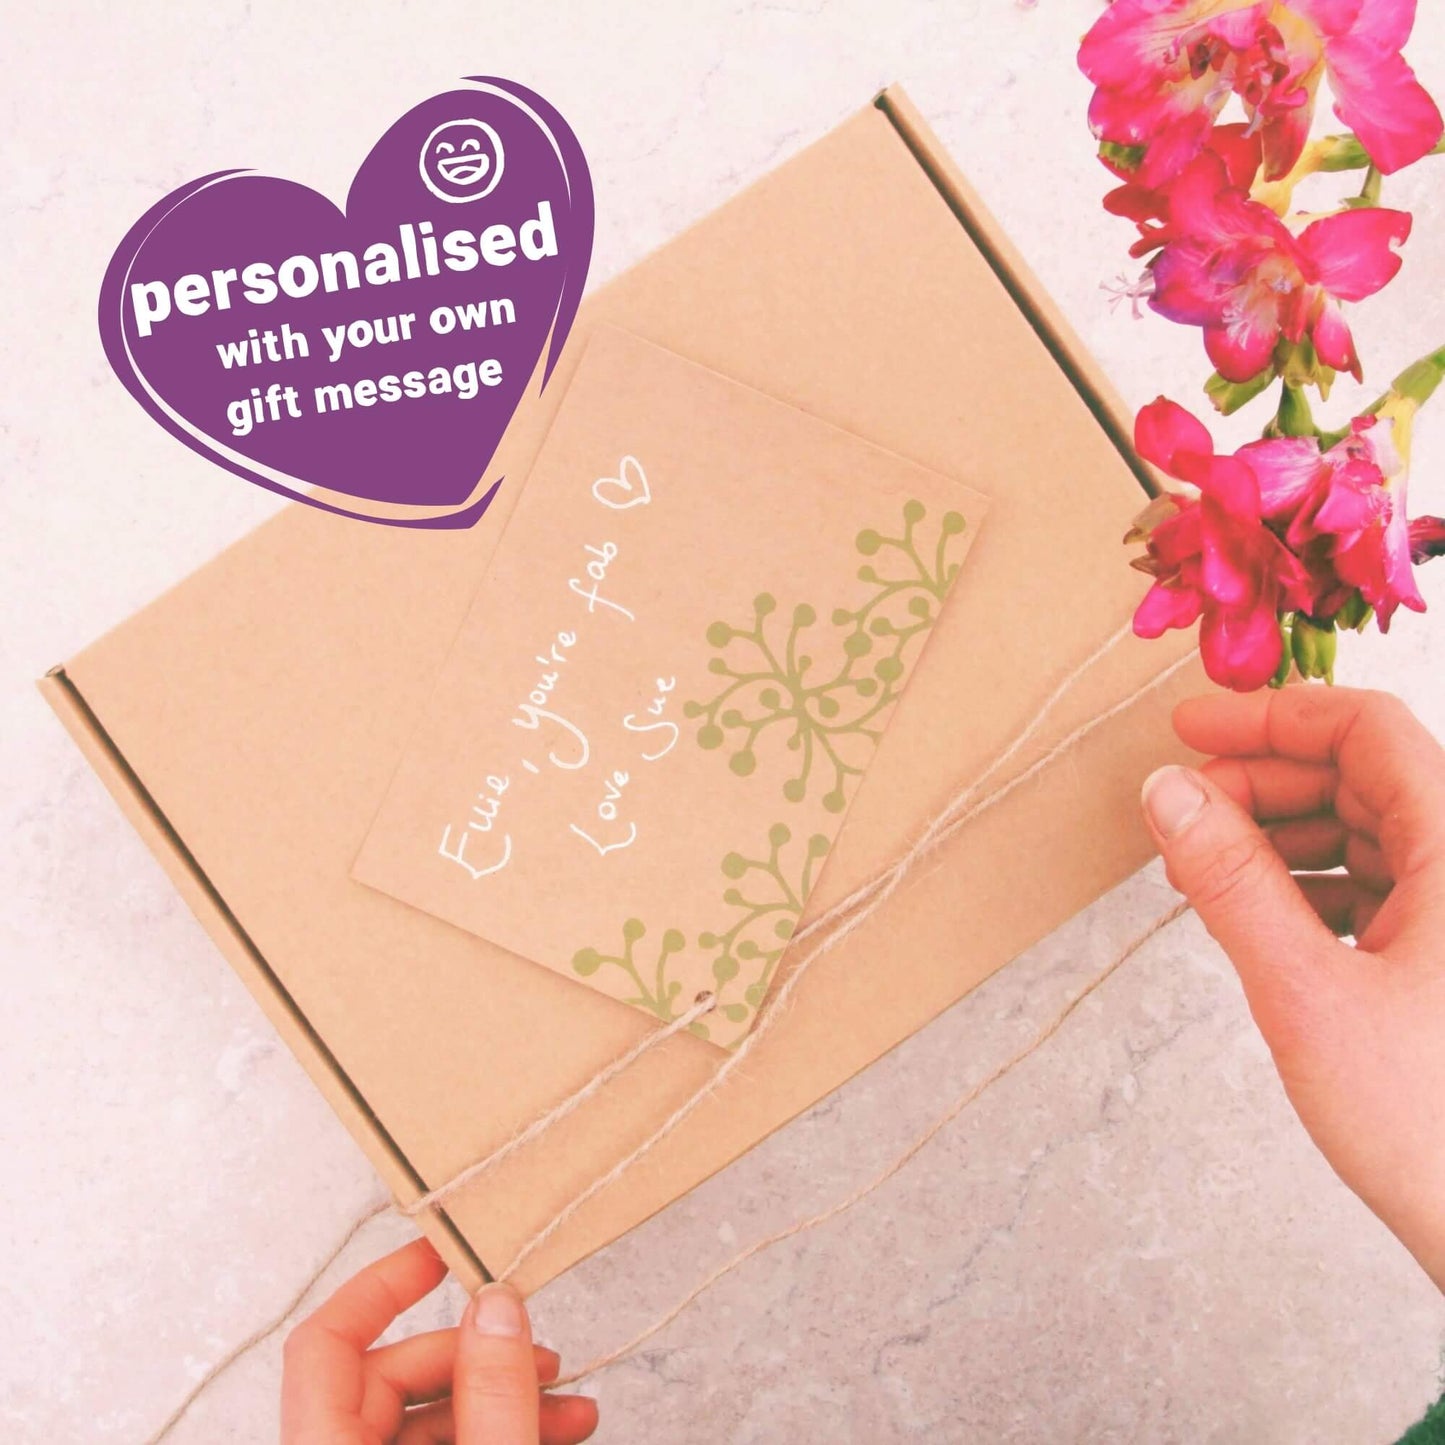 self care gift box is wrapped with your own personalised gift message